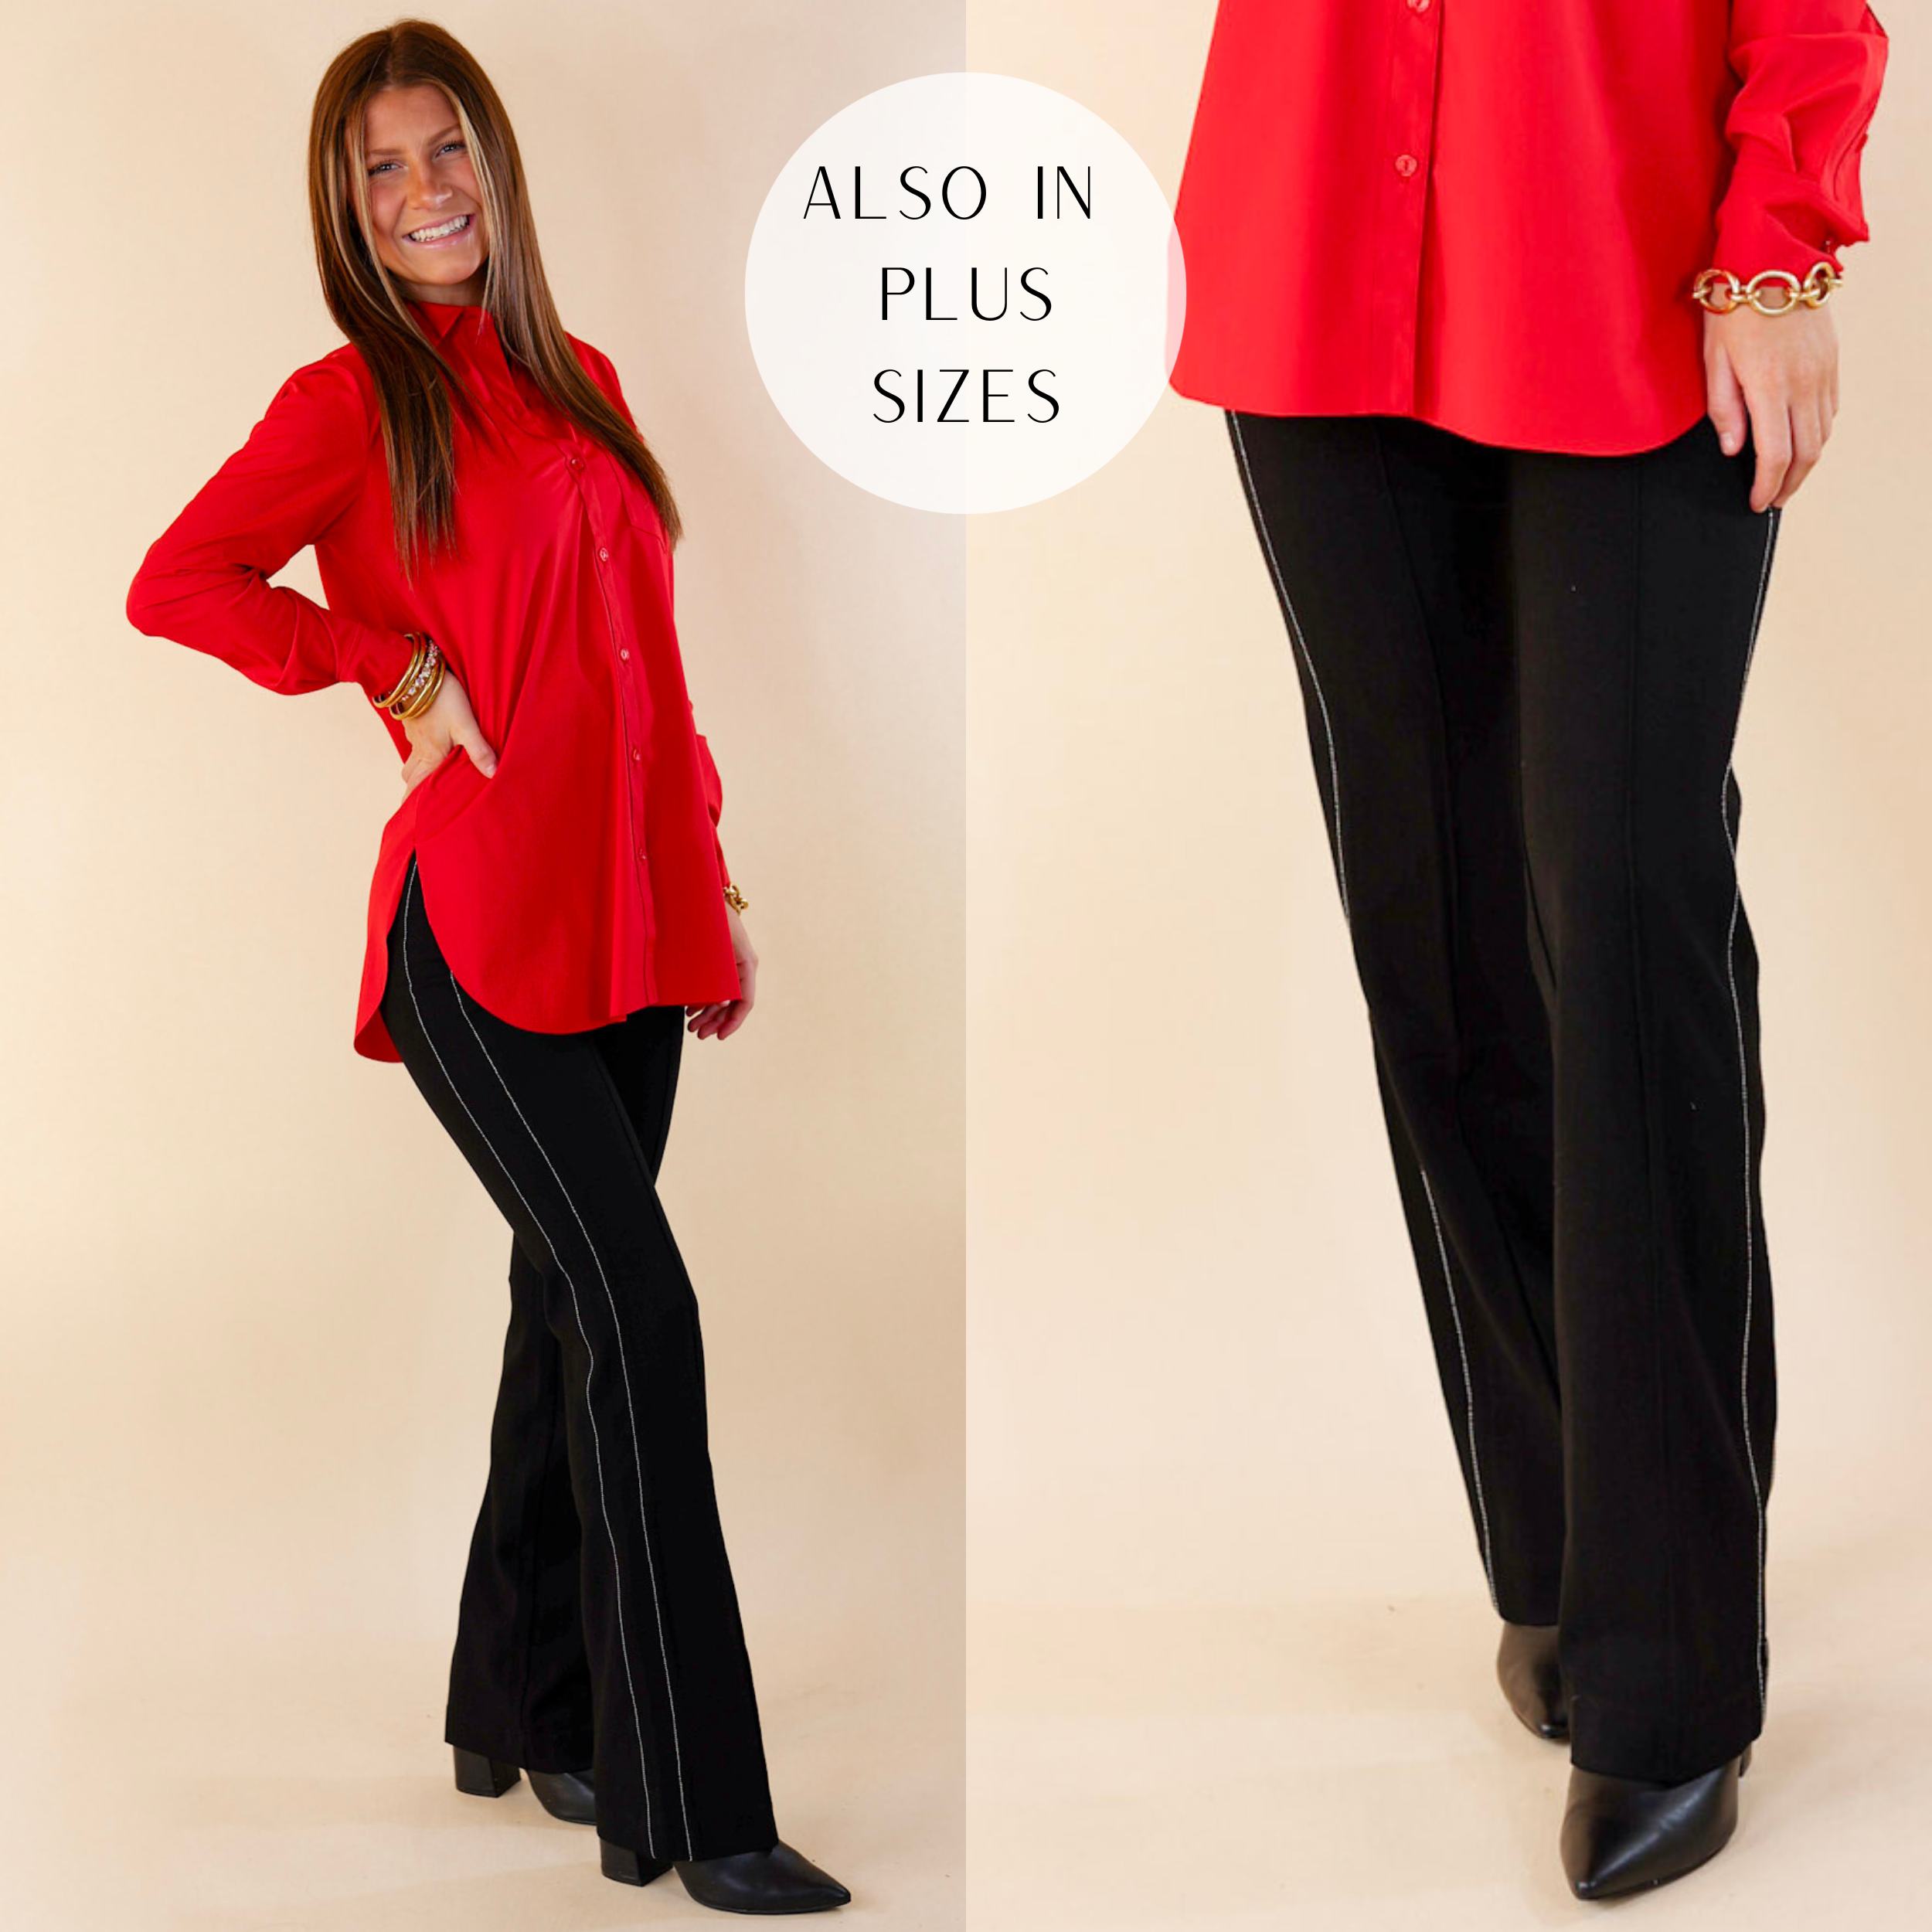 Model is wearing a pair of black pants with silver detail down the sides. Model has these pants paired with black booties, a red top, and gold jewelry.